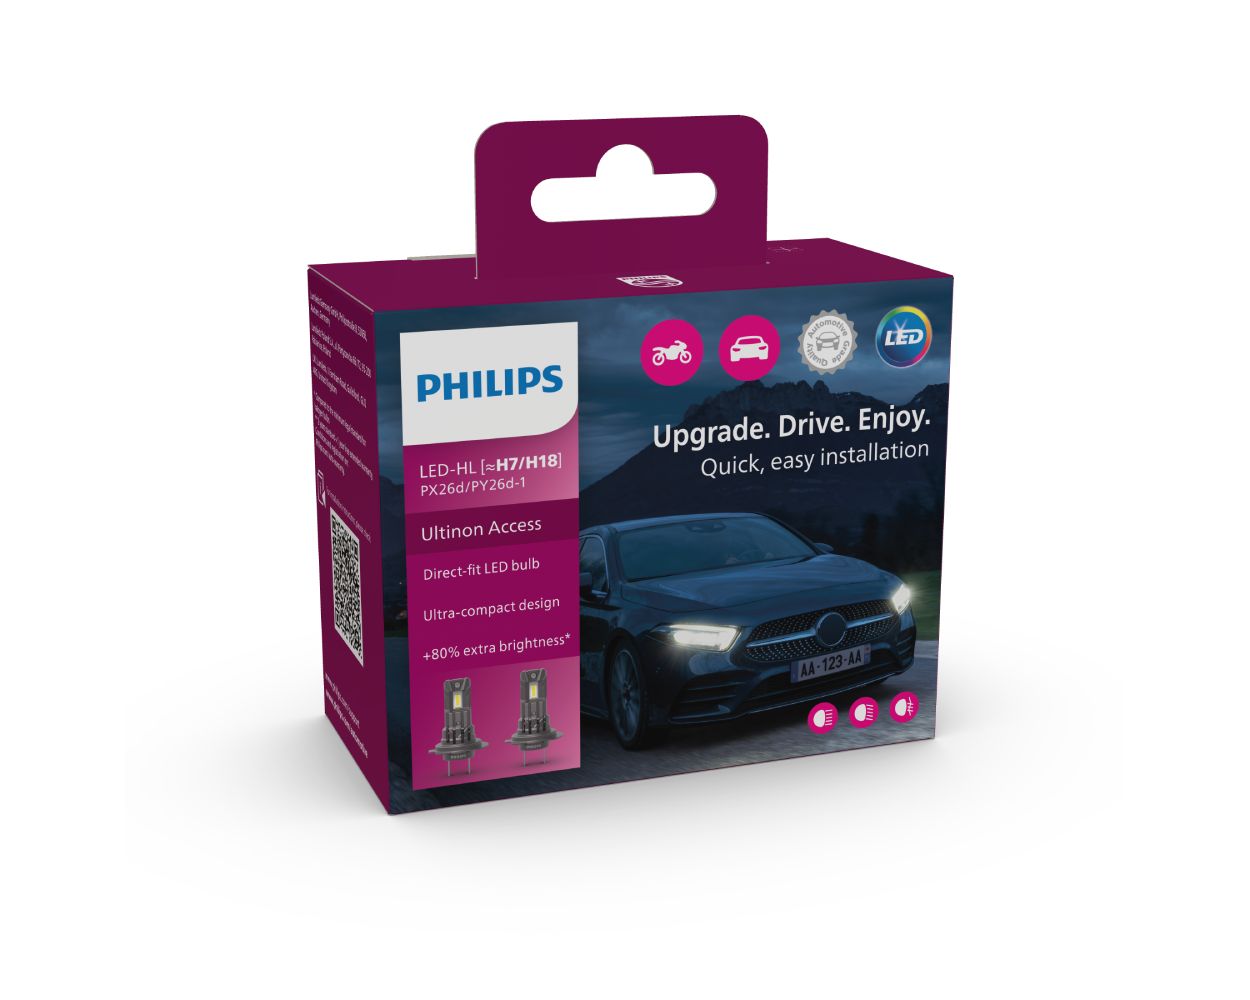 NEW Cheap Philips Ultinon Access 2500 H7 H18 LED Upgrade - Test